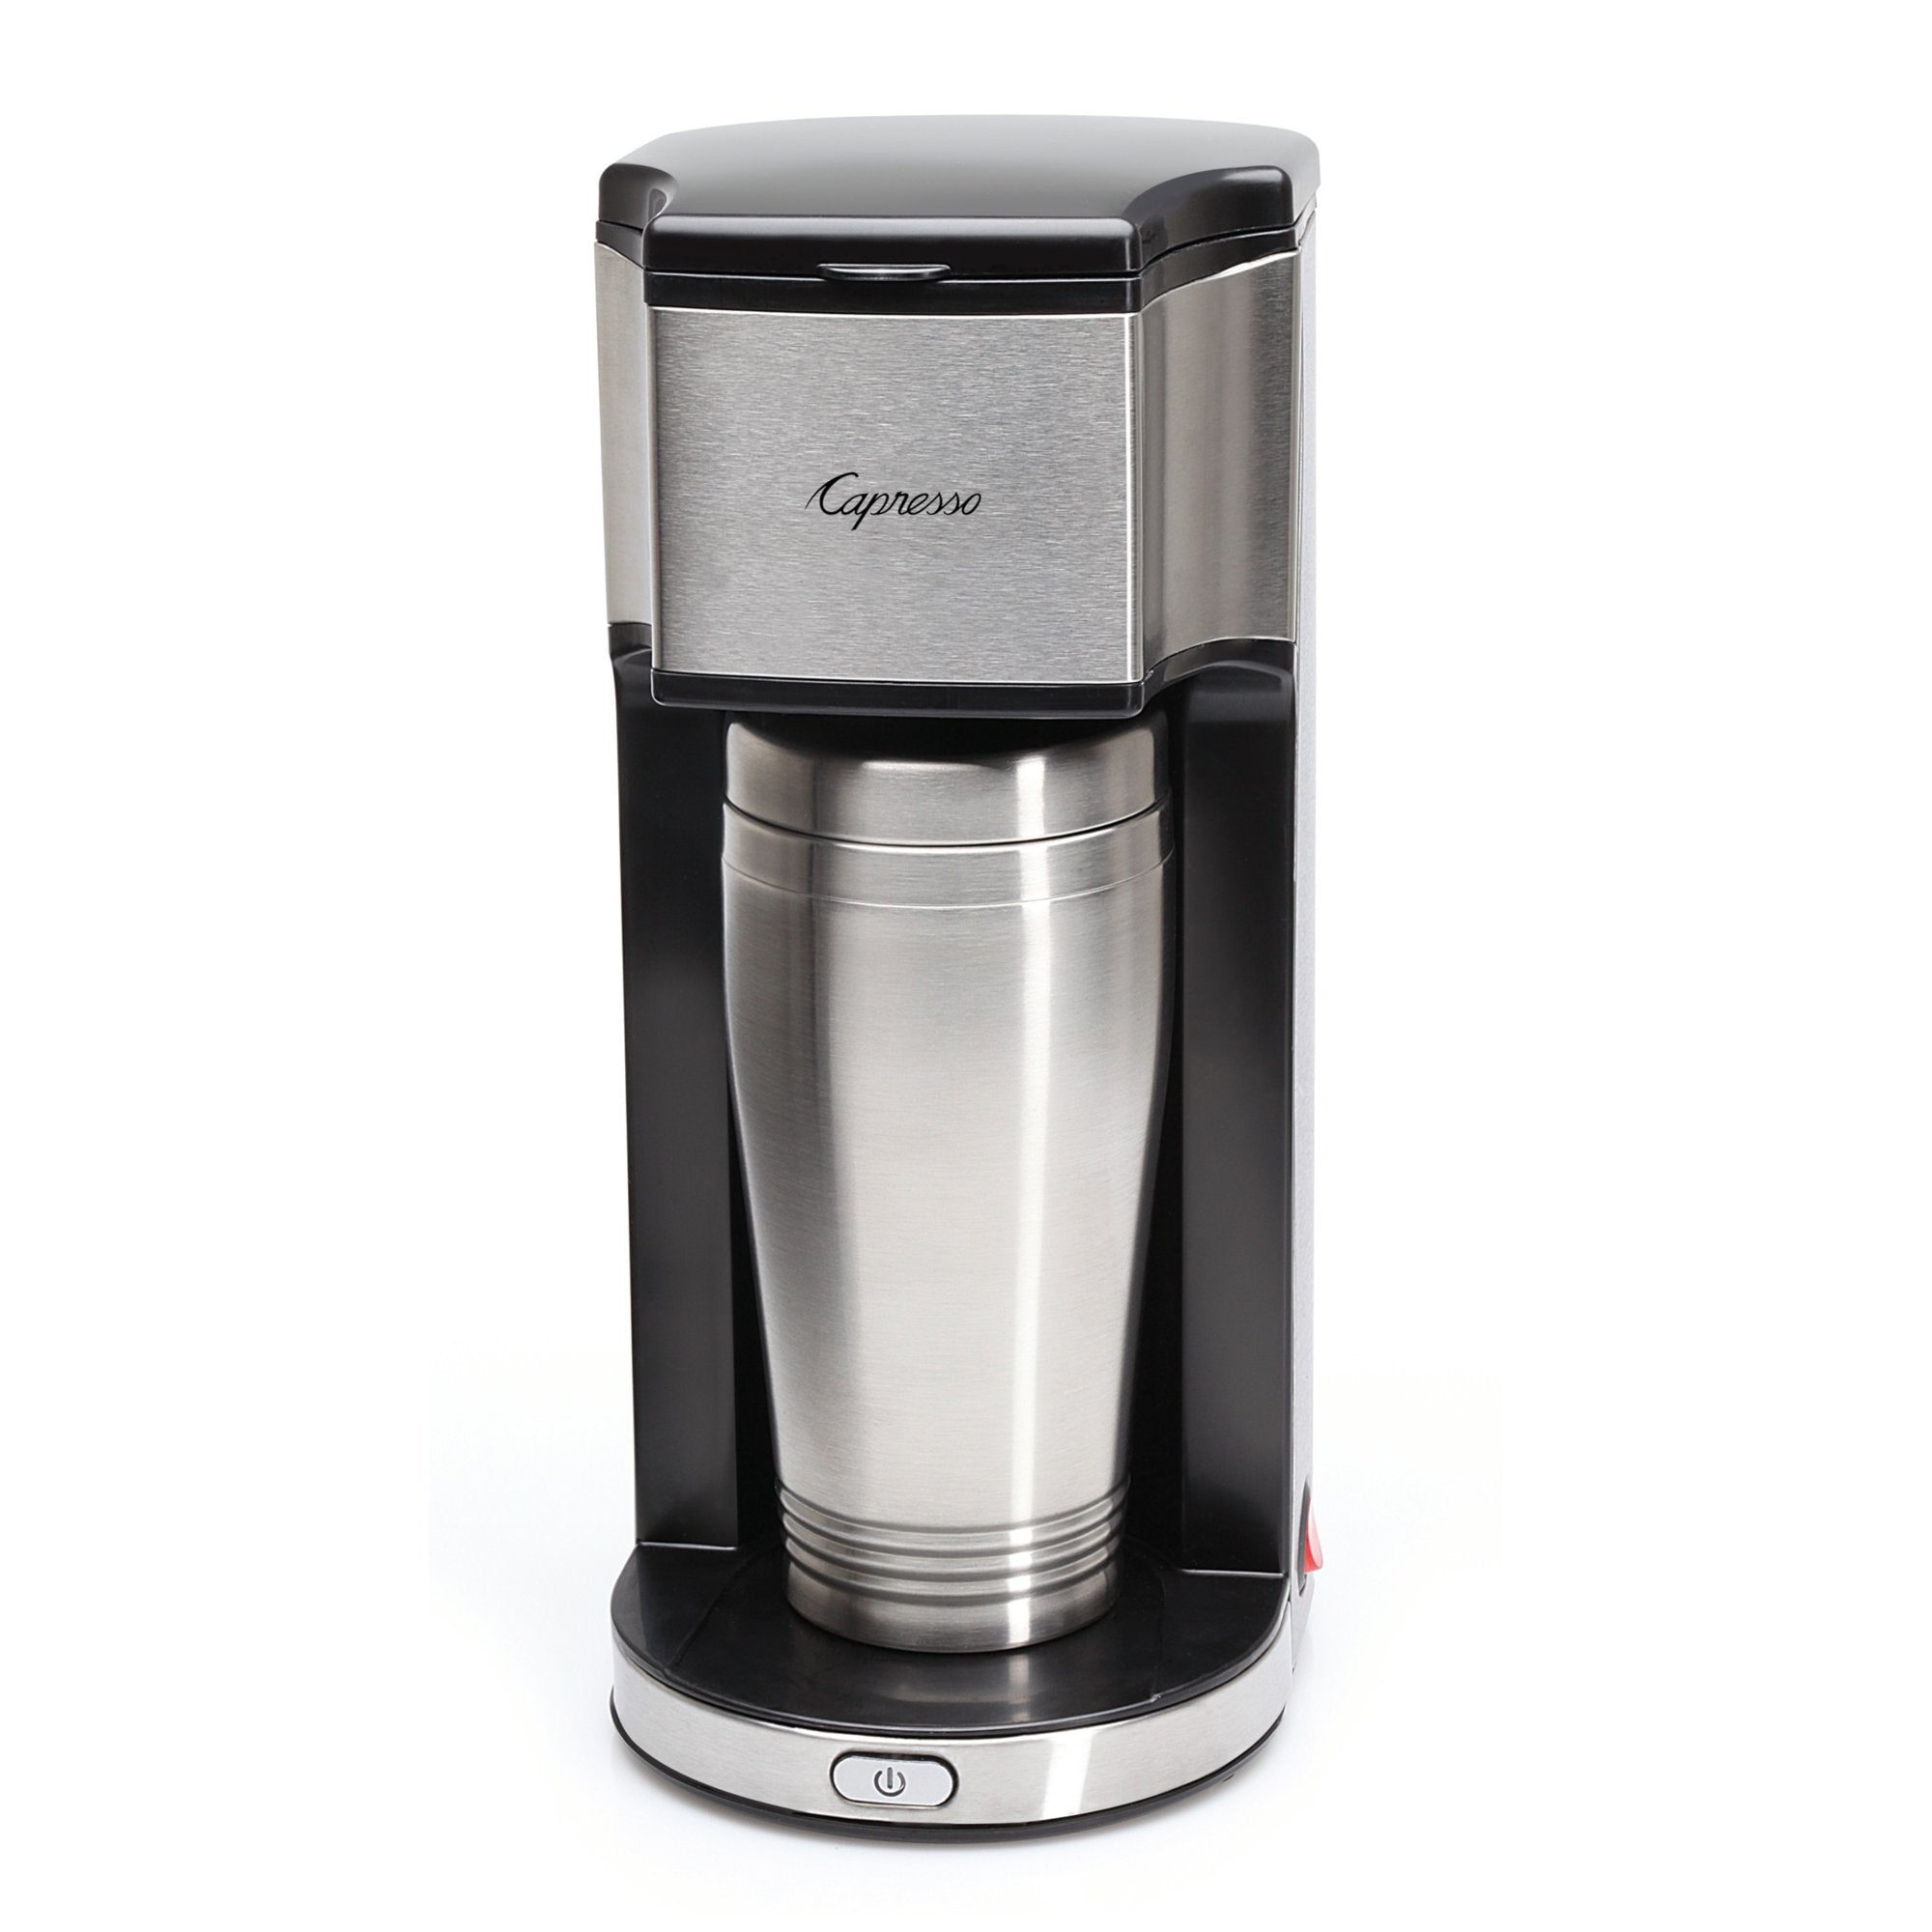 Capresso ONTHEGO-RB 425 Personal Coffee Maker, Silver/Black - Certified Refurbished